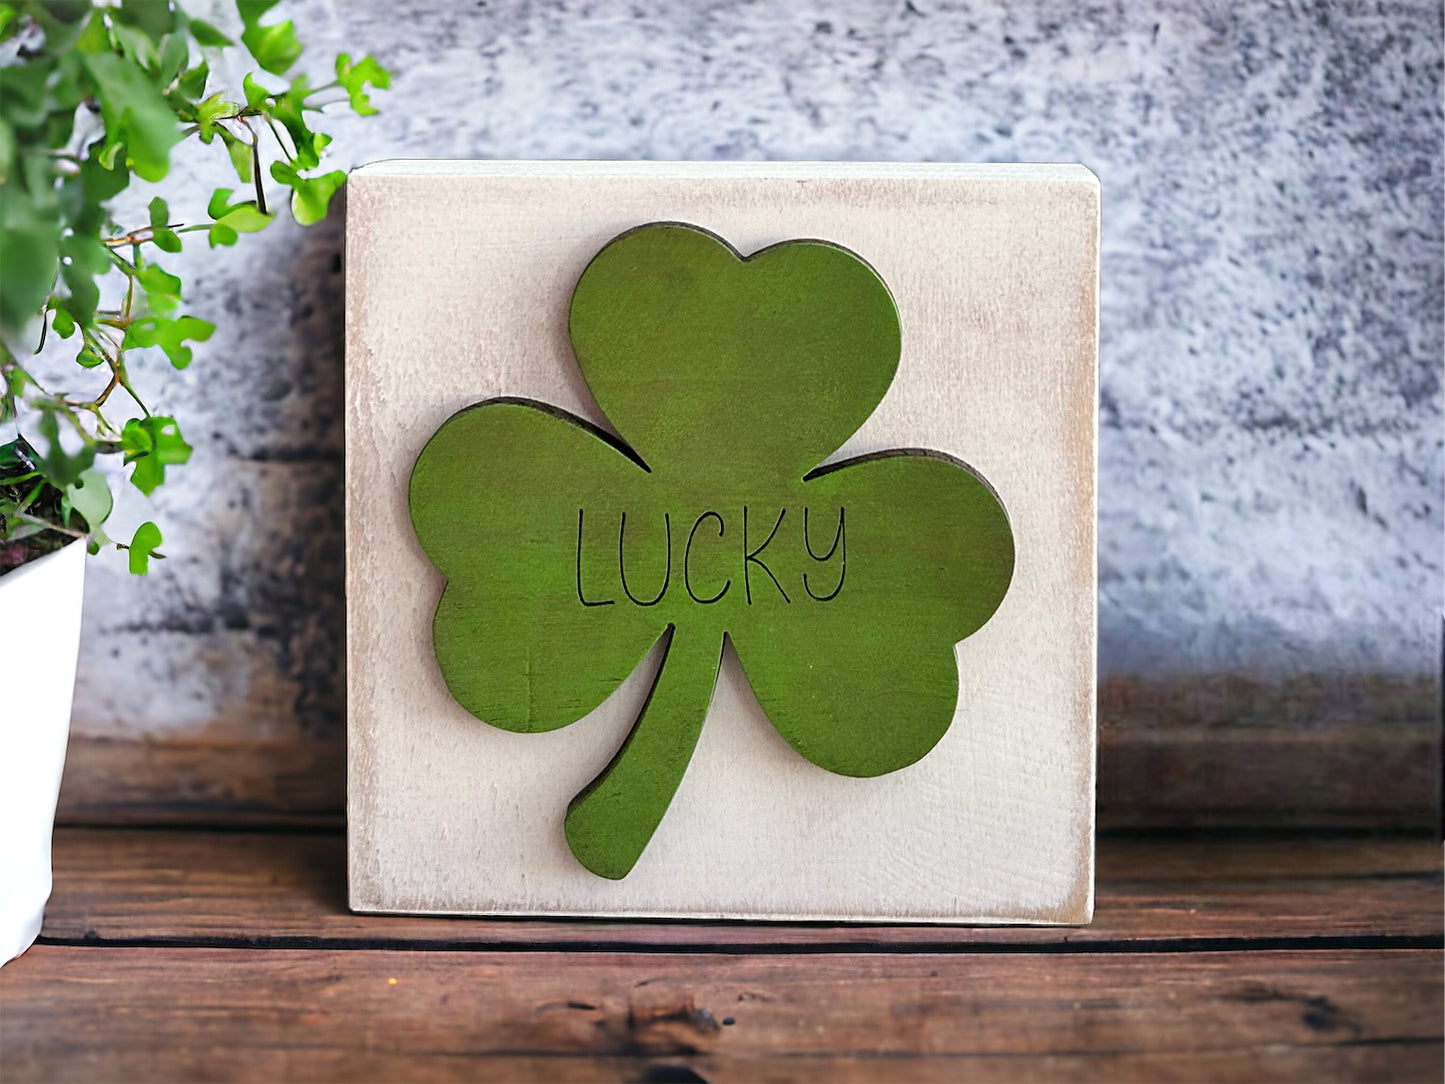 Rustic/Farmhouse Engraved “Lucky” Clover Wood Block Sign